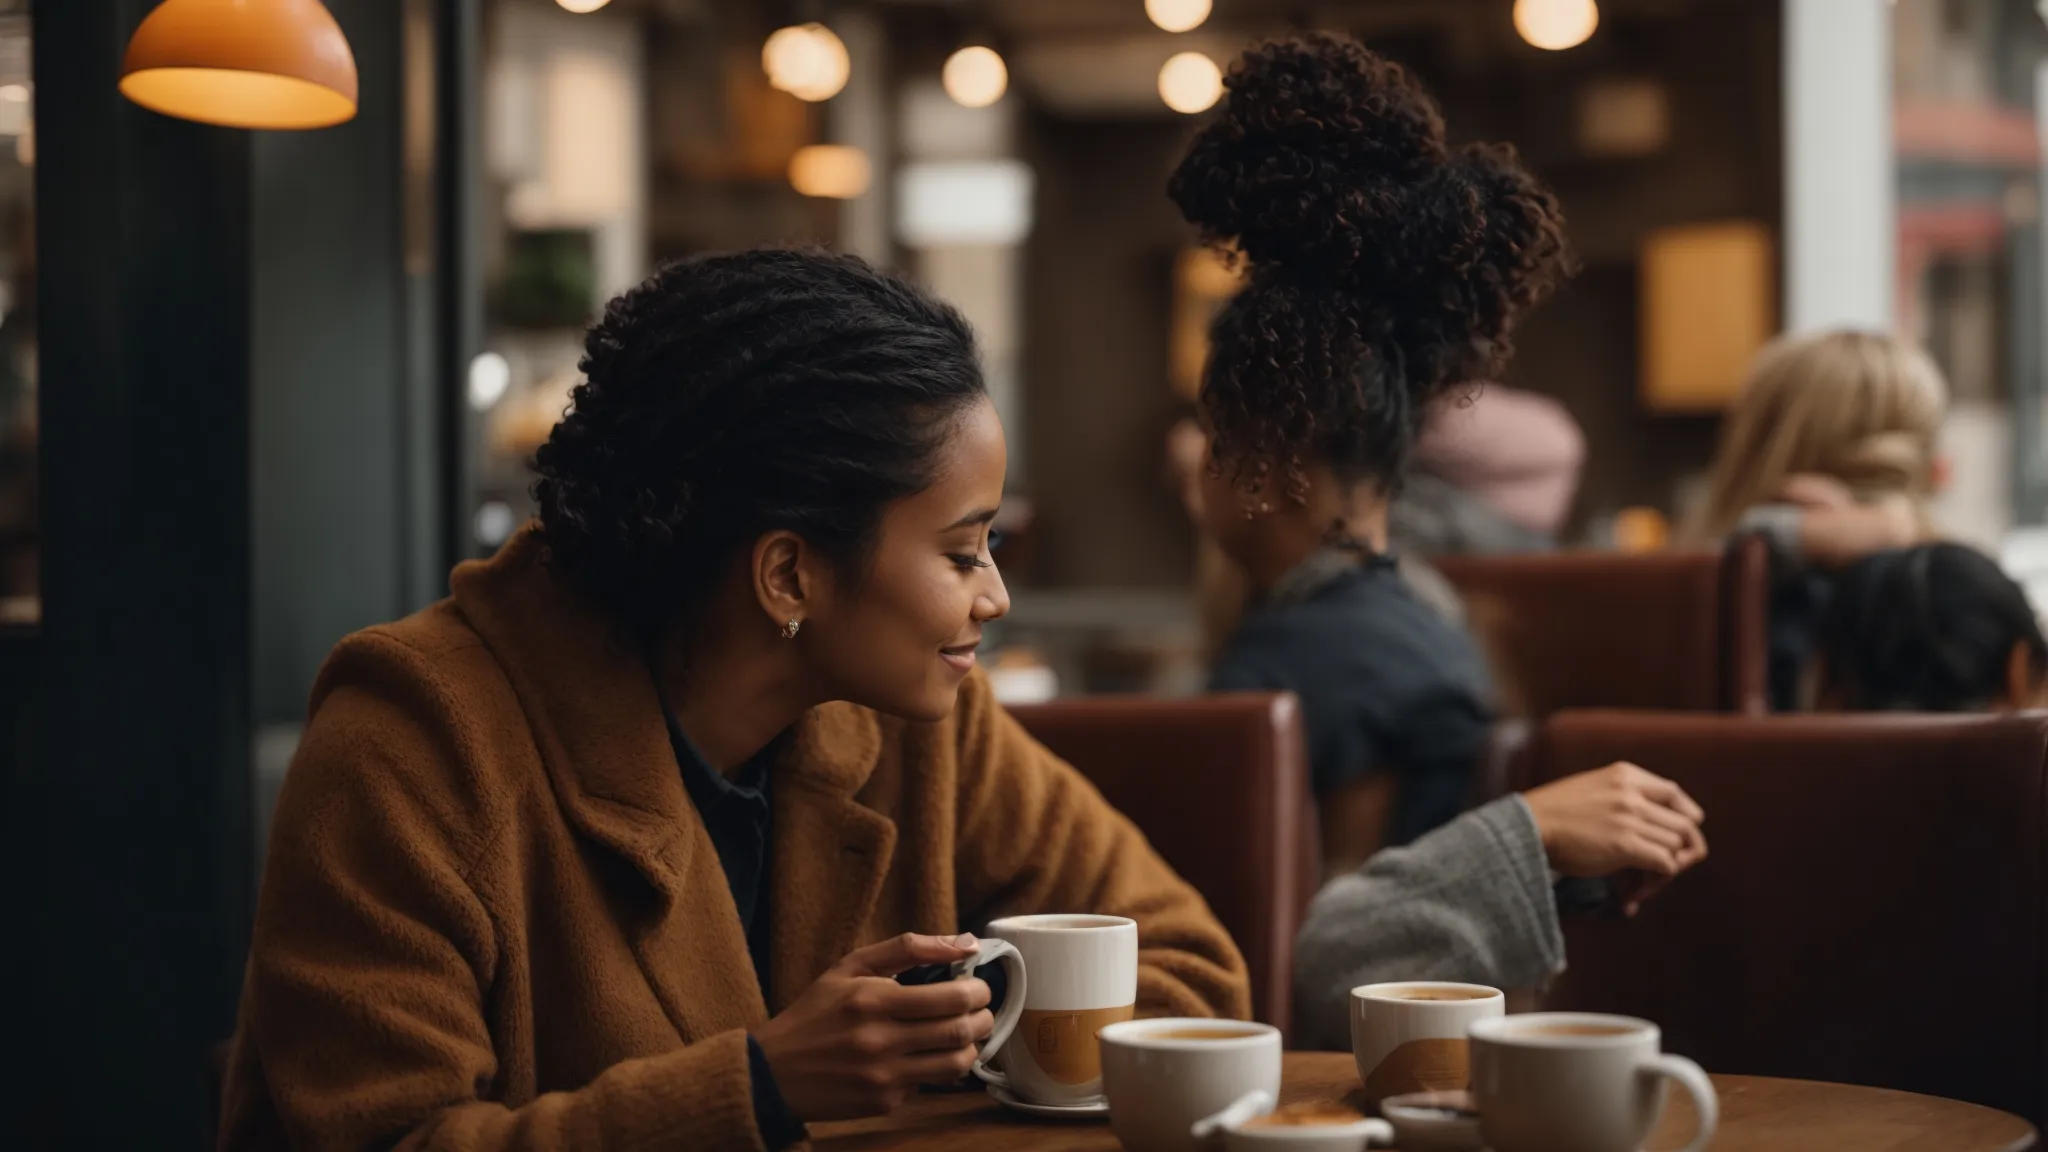 two individuals engaged in a lively conversation over a cup of coffee in a warm, inviting cafe, symbolizing genuine human connection.